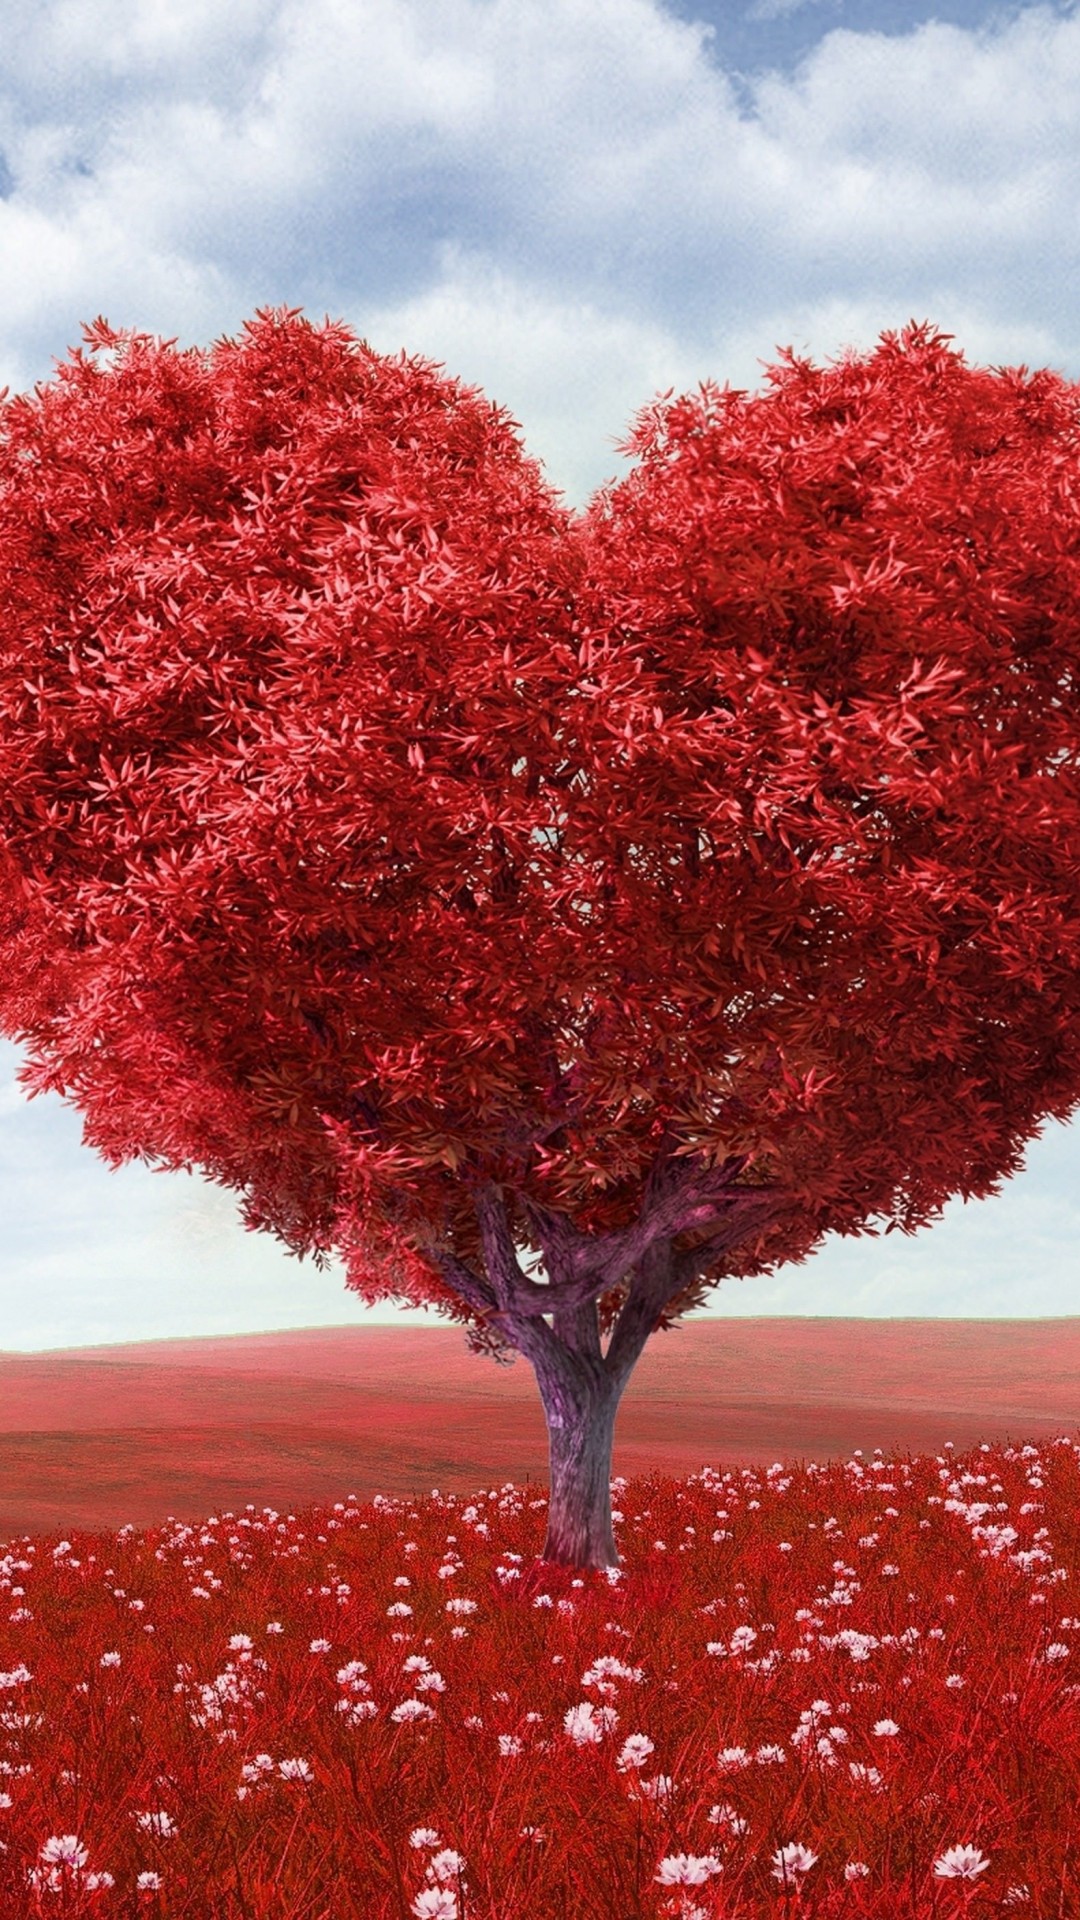 The Tree Of Love Wallpaper for SAMSUNG Galaxy S4